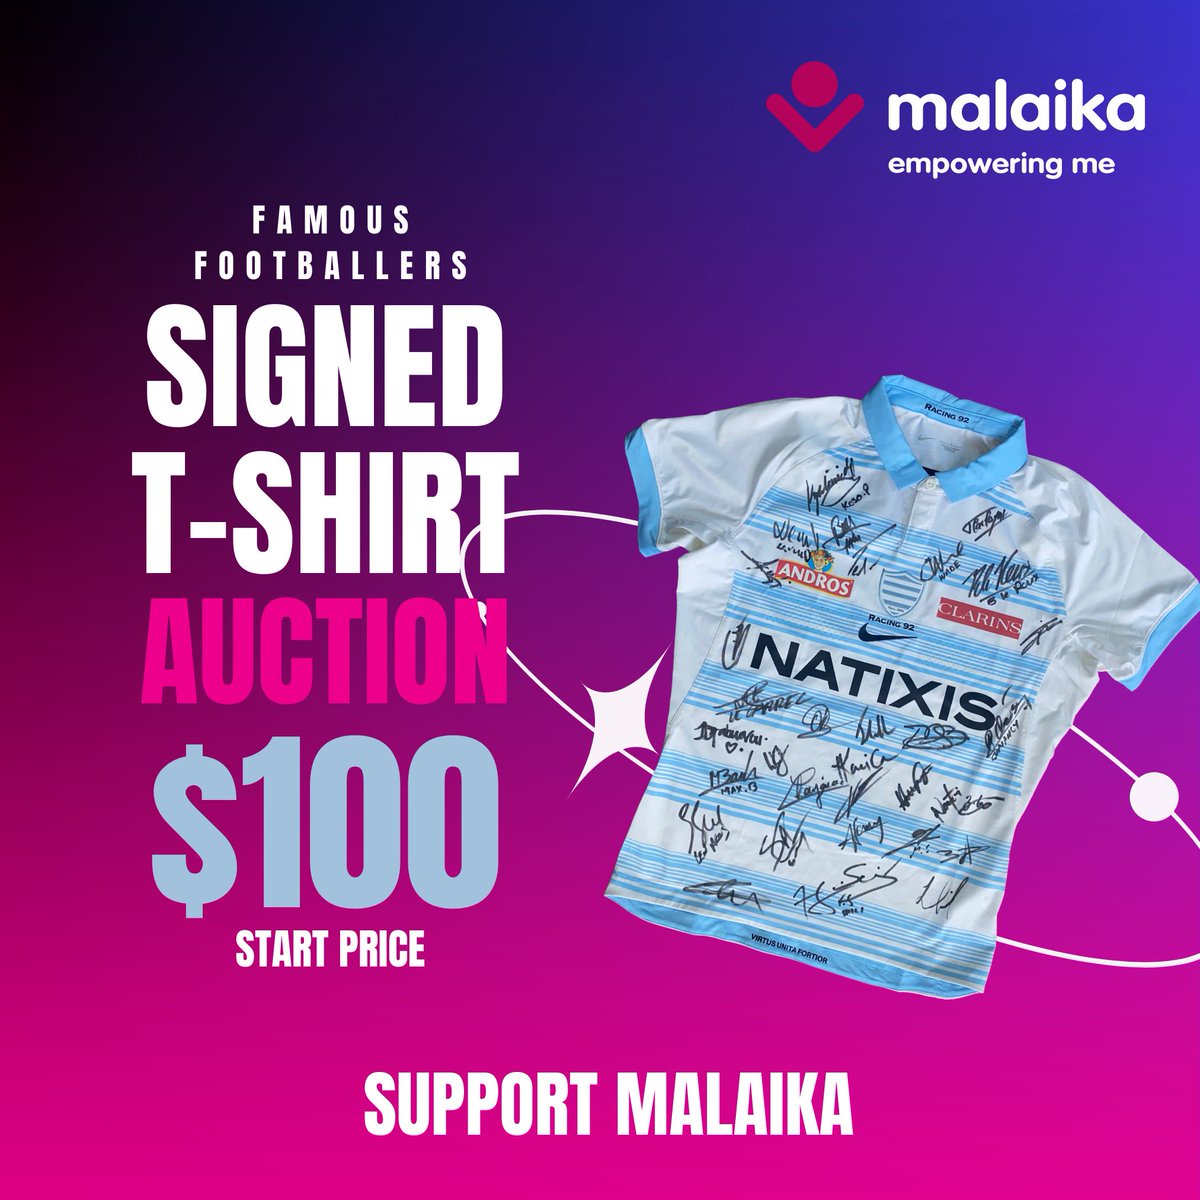 Bid to win! Our Goodwill Ambassador @yannicknyanga has generously organised an auction for this signed jersey from the rugby team @racing92, whereby all the funds received will go directly to Malaika. Please send enquiries/bids to info@malaika.org